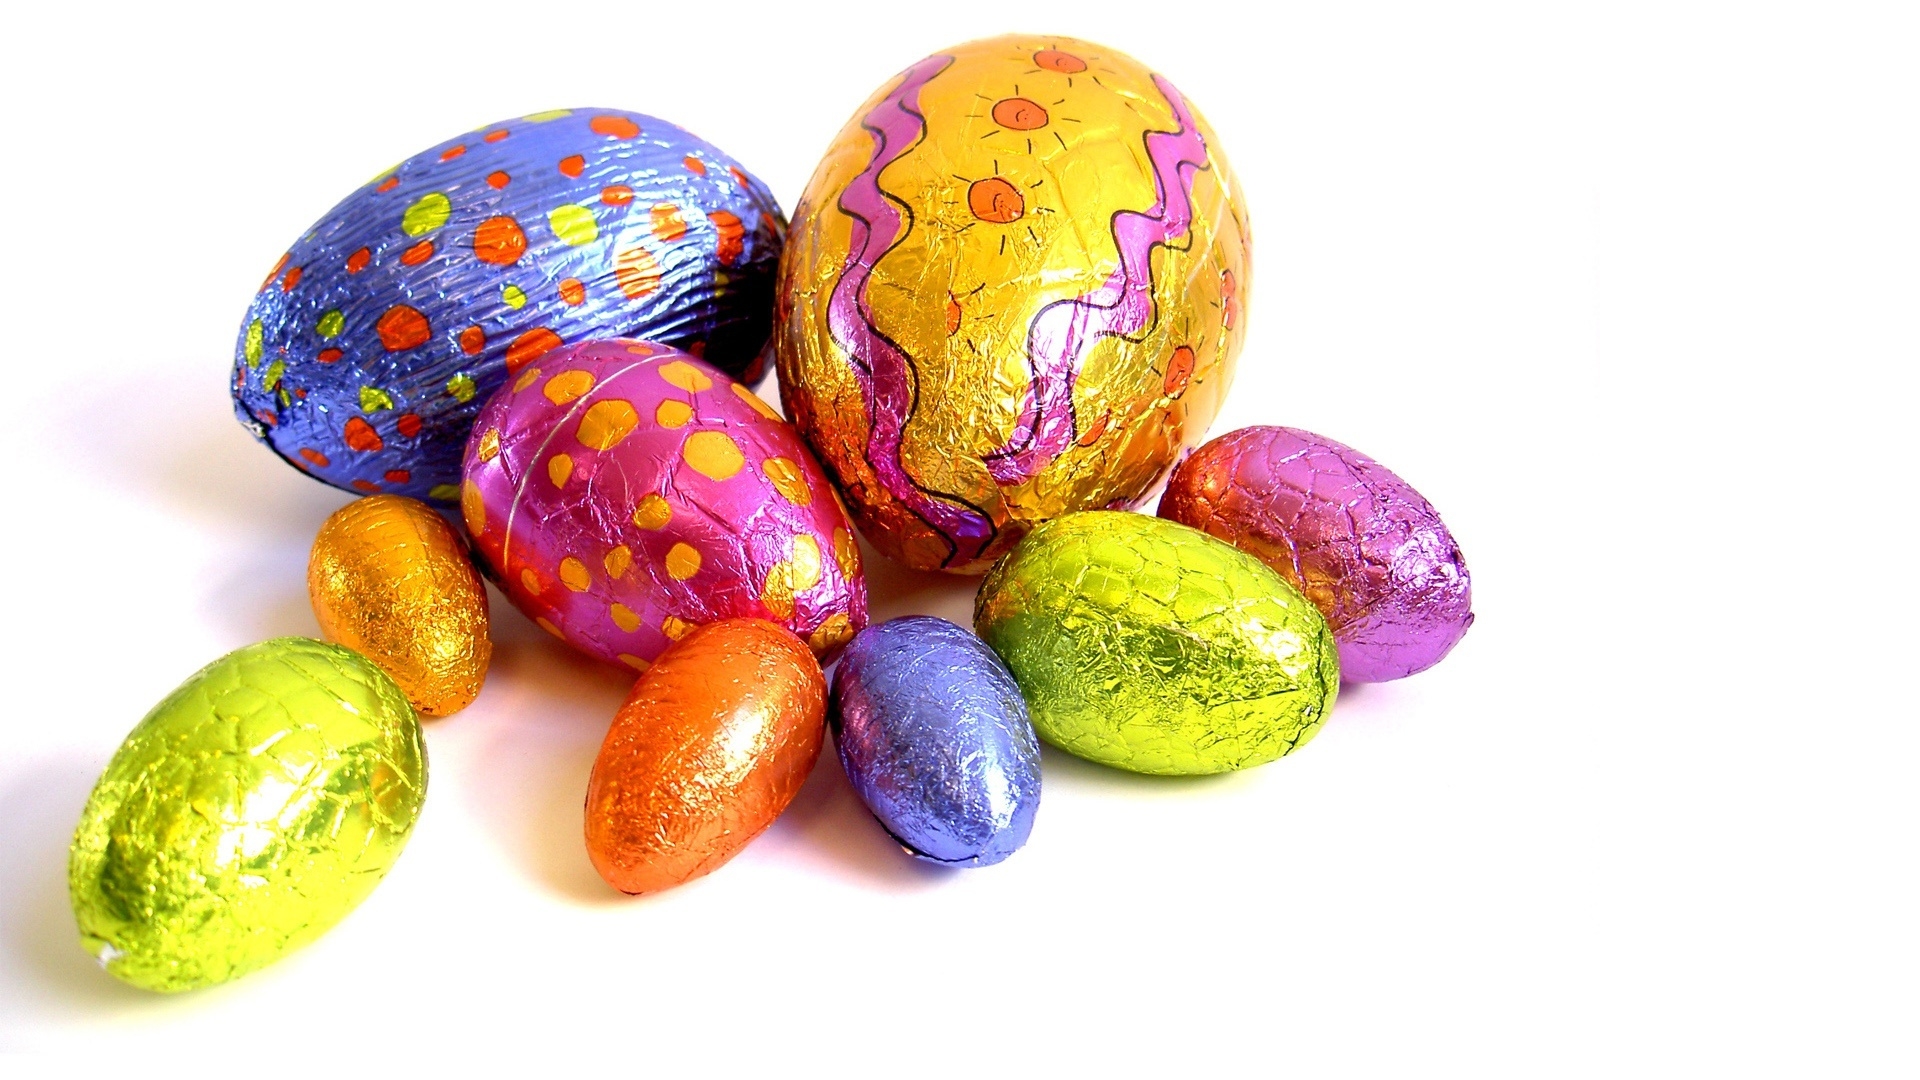 Great Easter Eggs for 1920 x 1080 HDTV 1080p resolution